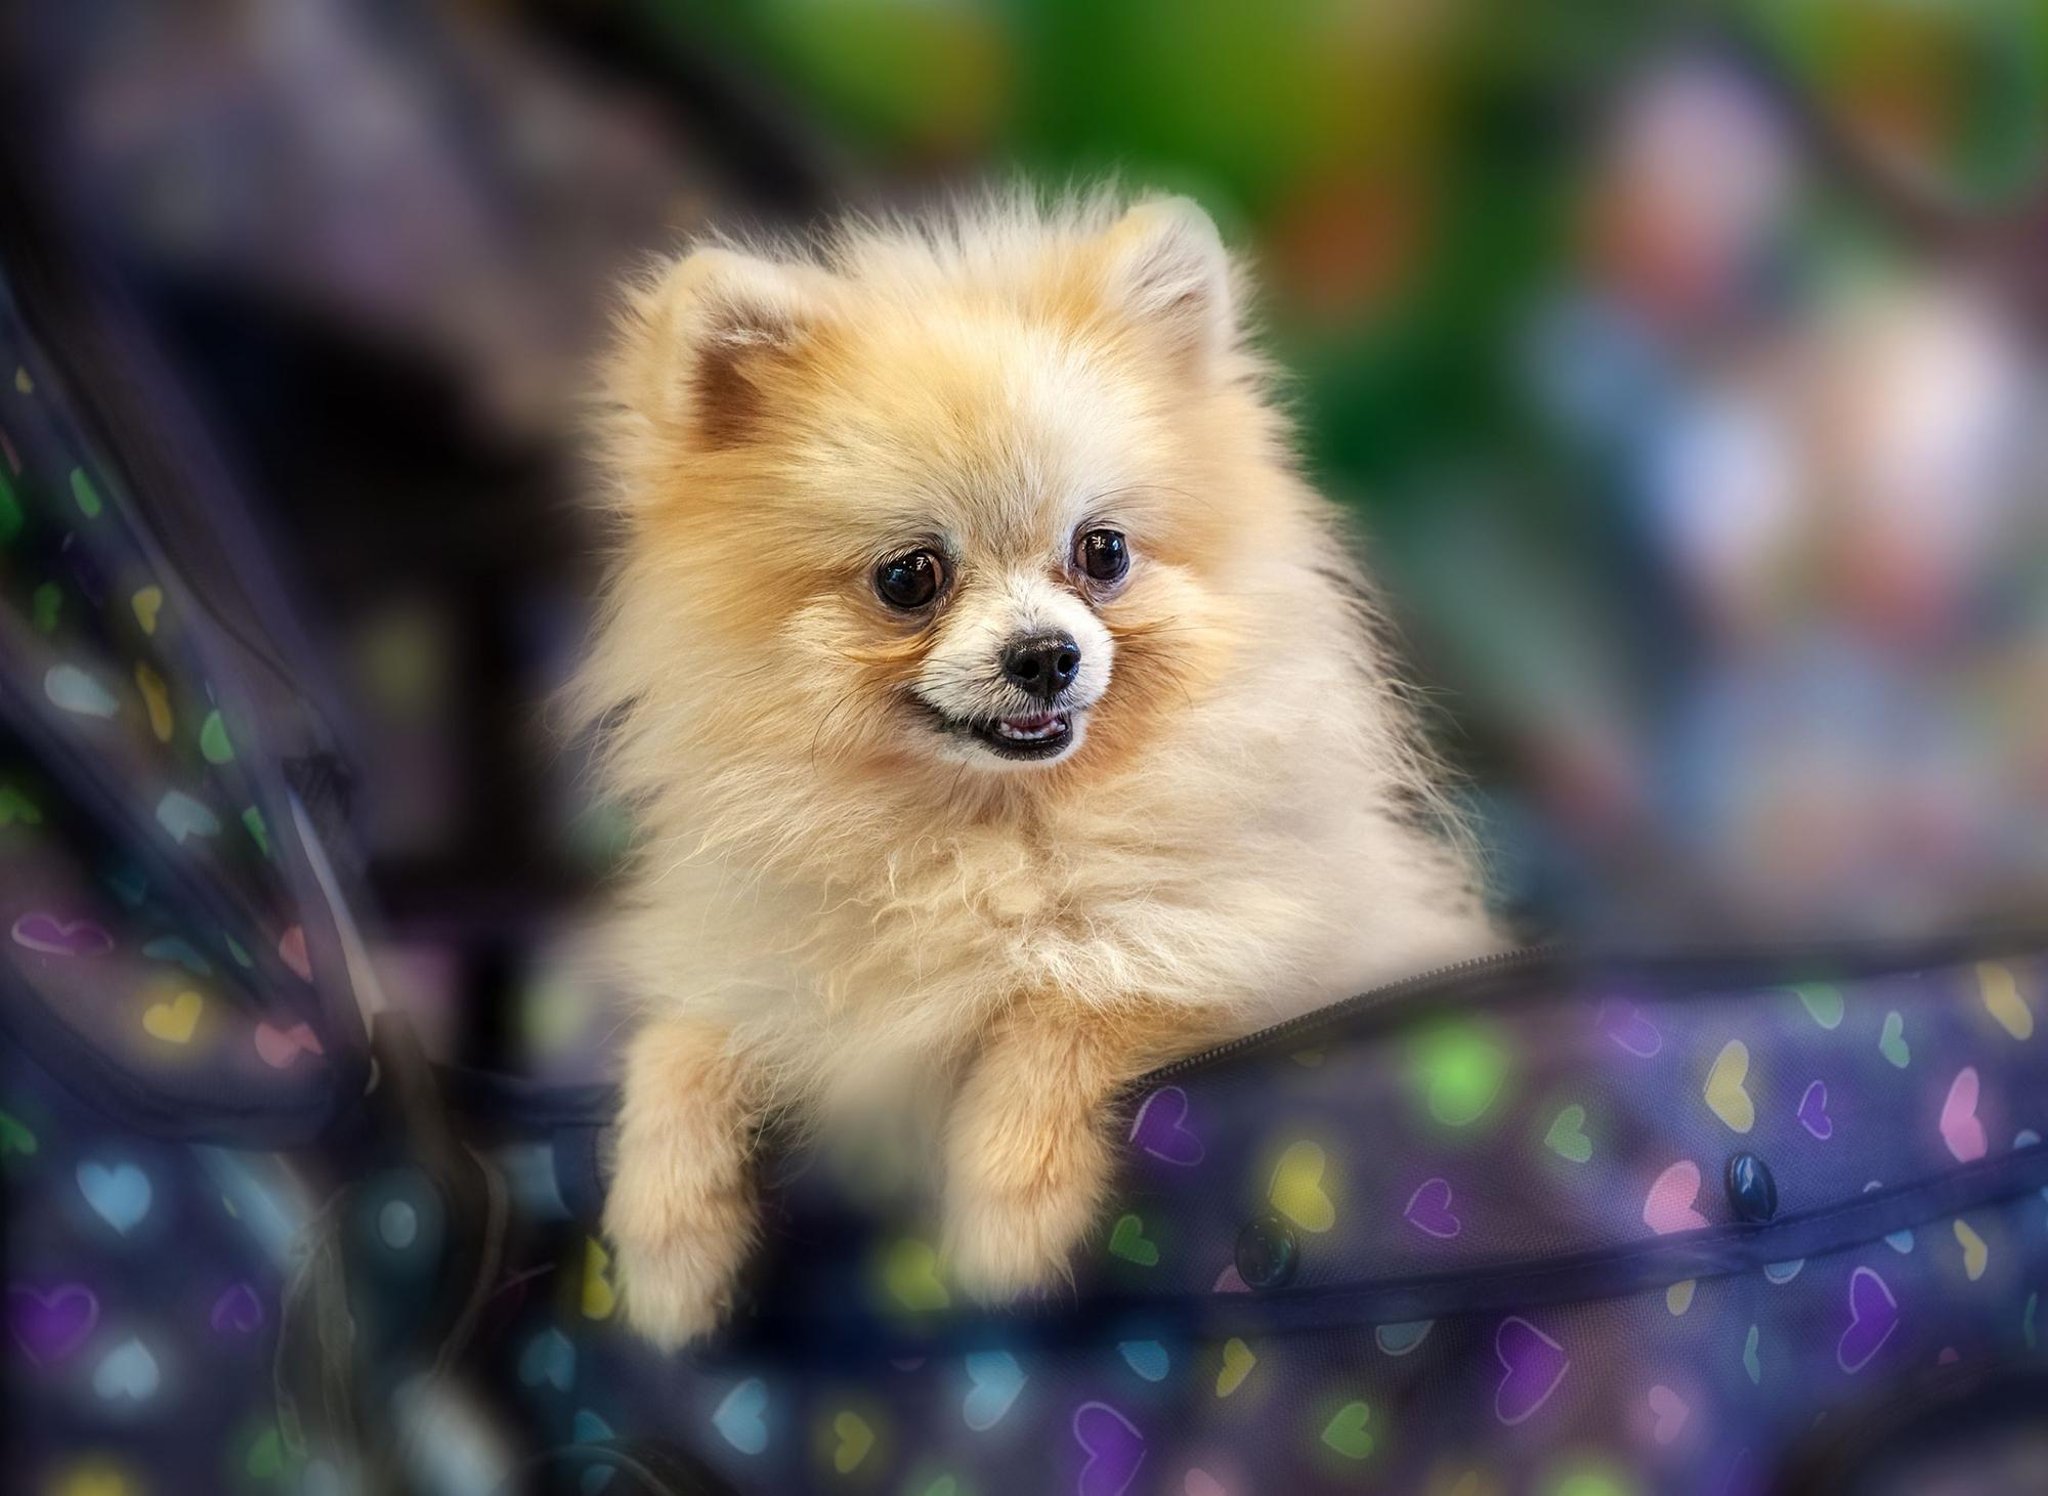 are 10 fun dog facts you should the adorable Pomeranian The Scotsman